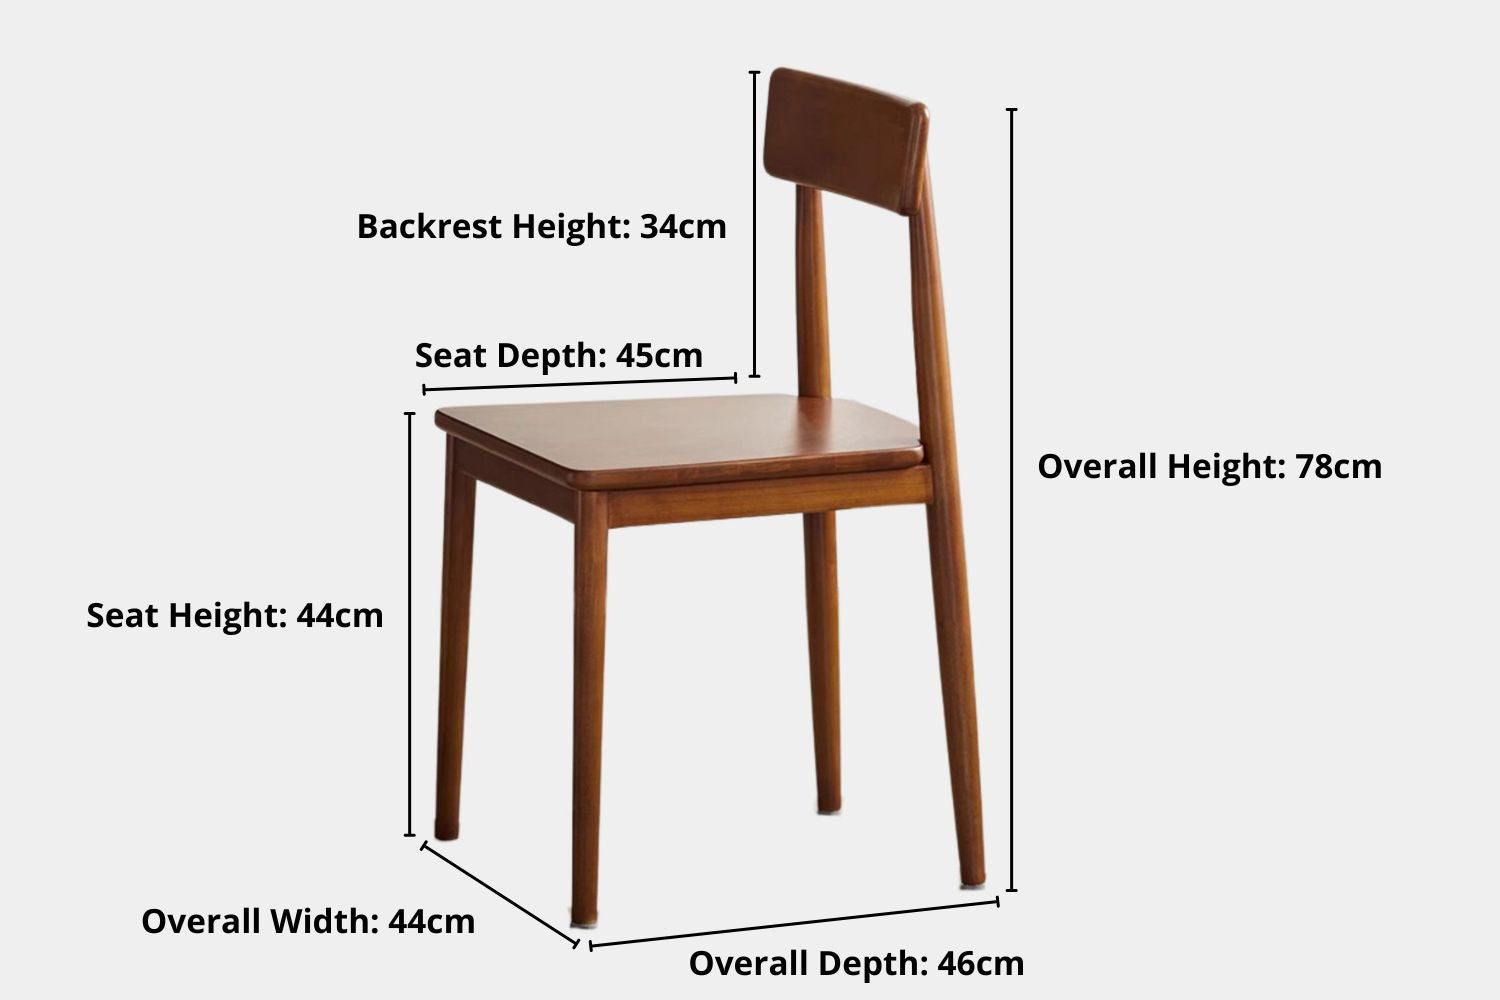 Key product dimensions such as depth, width and height for Tranquil Poplar Wood Chair